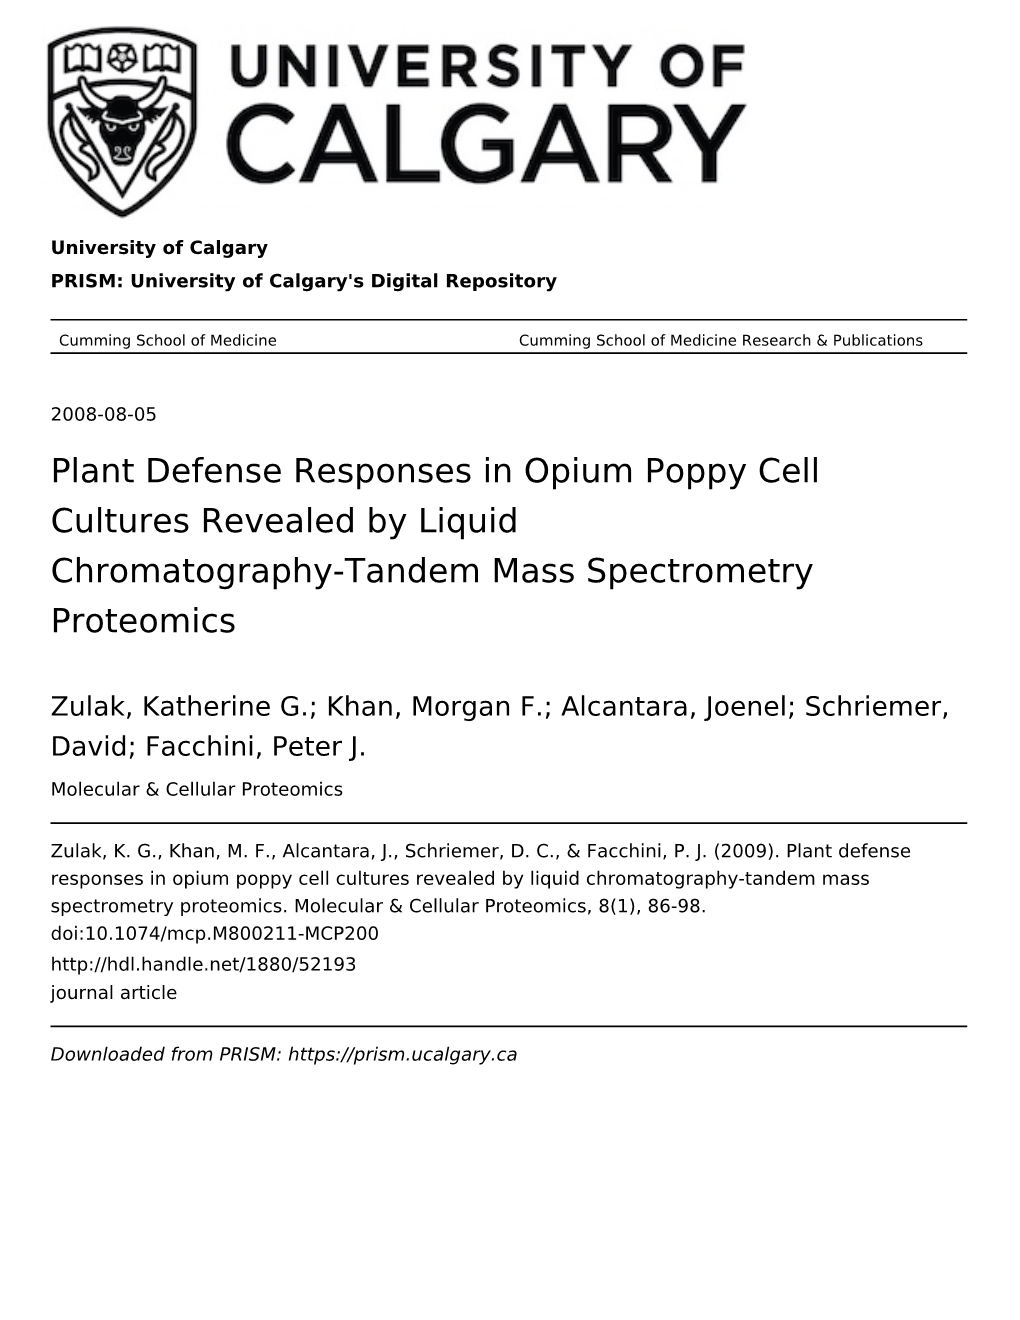 Plant Defense Responses in Opium Poppy Cell Cultures Revealed by Liquid Chromatography-Tandem Mass Spectrometry Proteomics